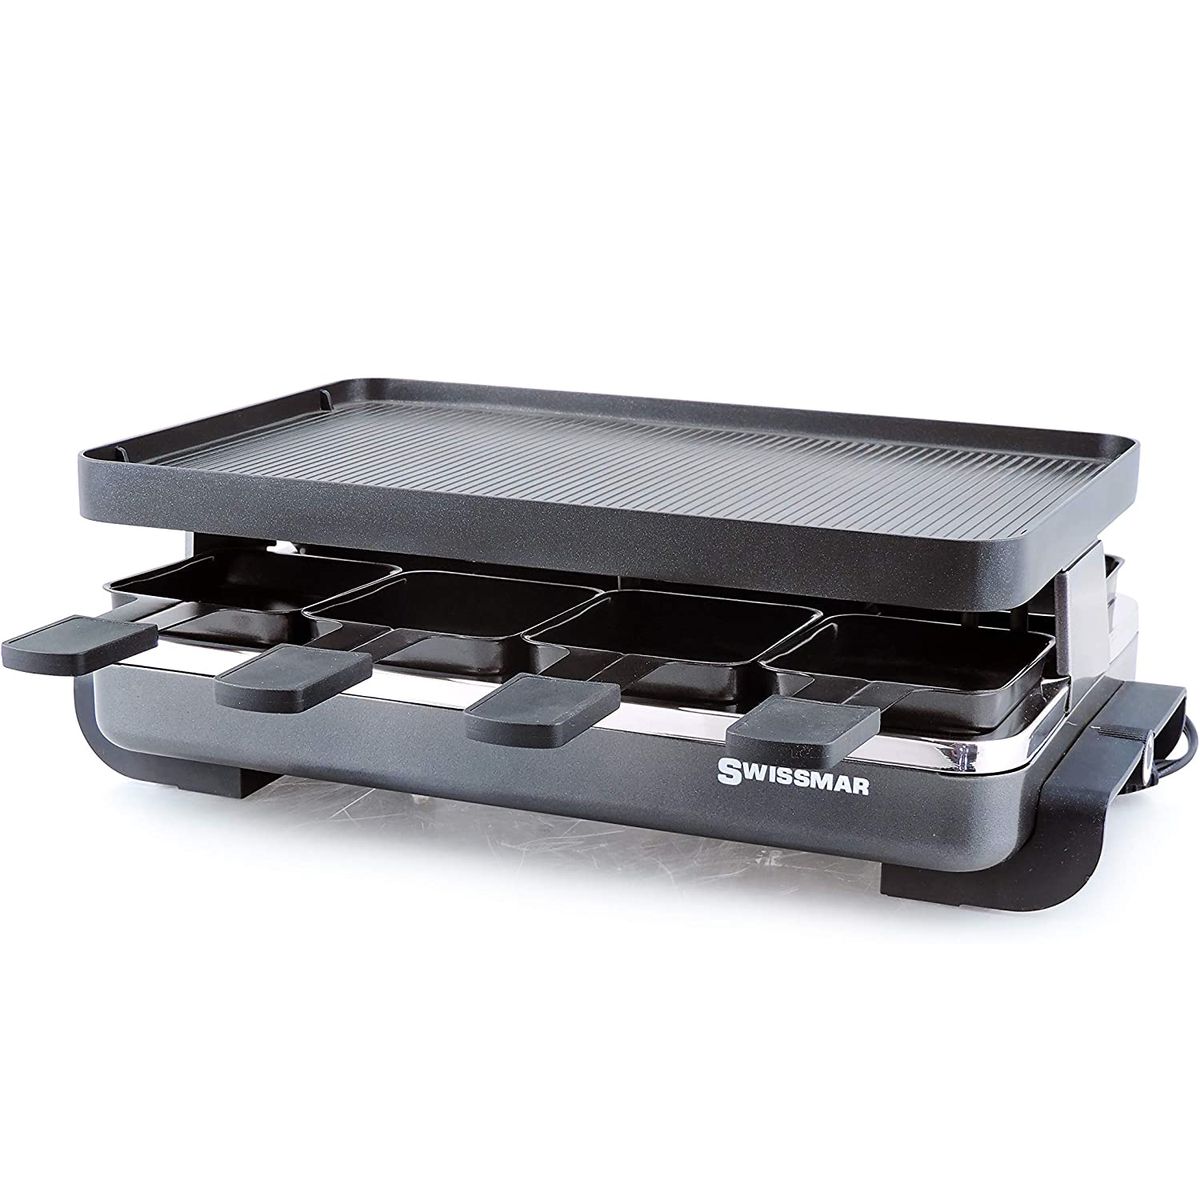 Raclette grill from Amazon